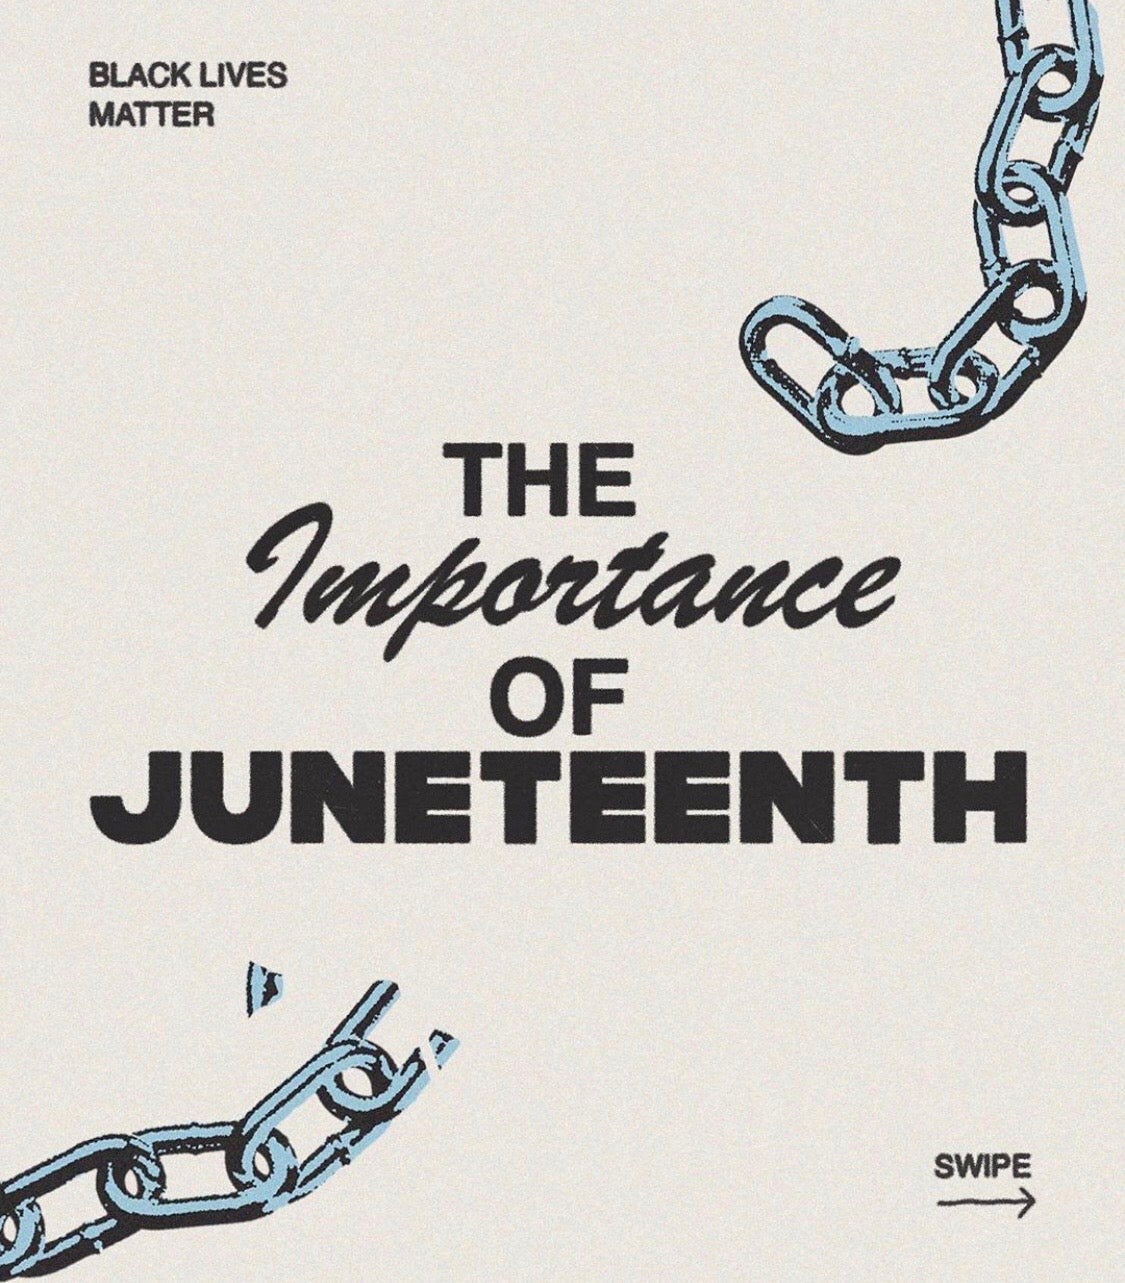 The Importance of JUNETEENTH